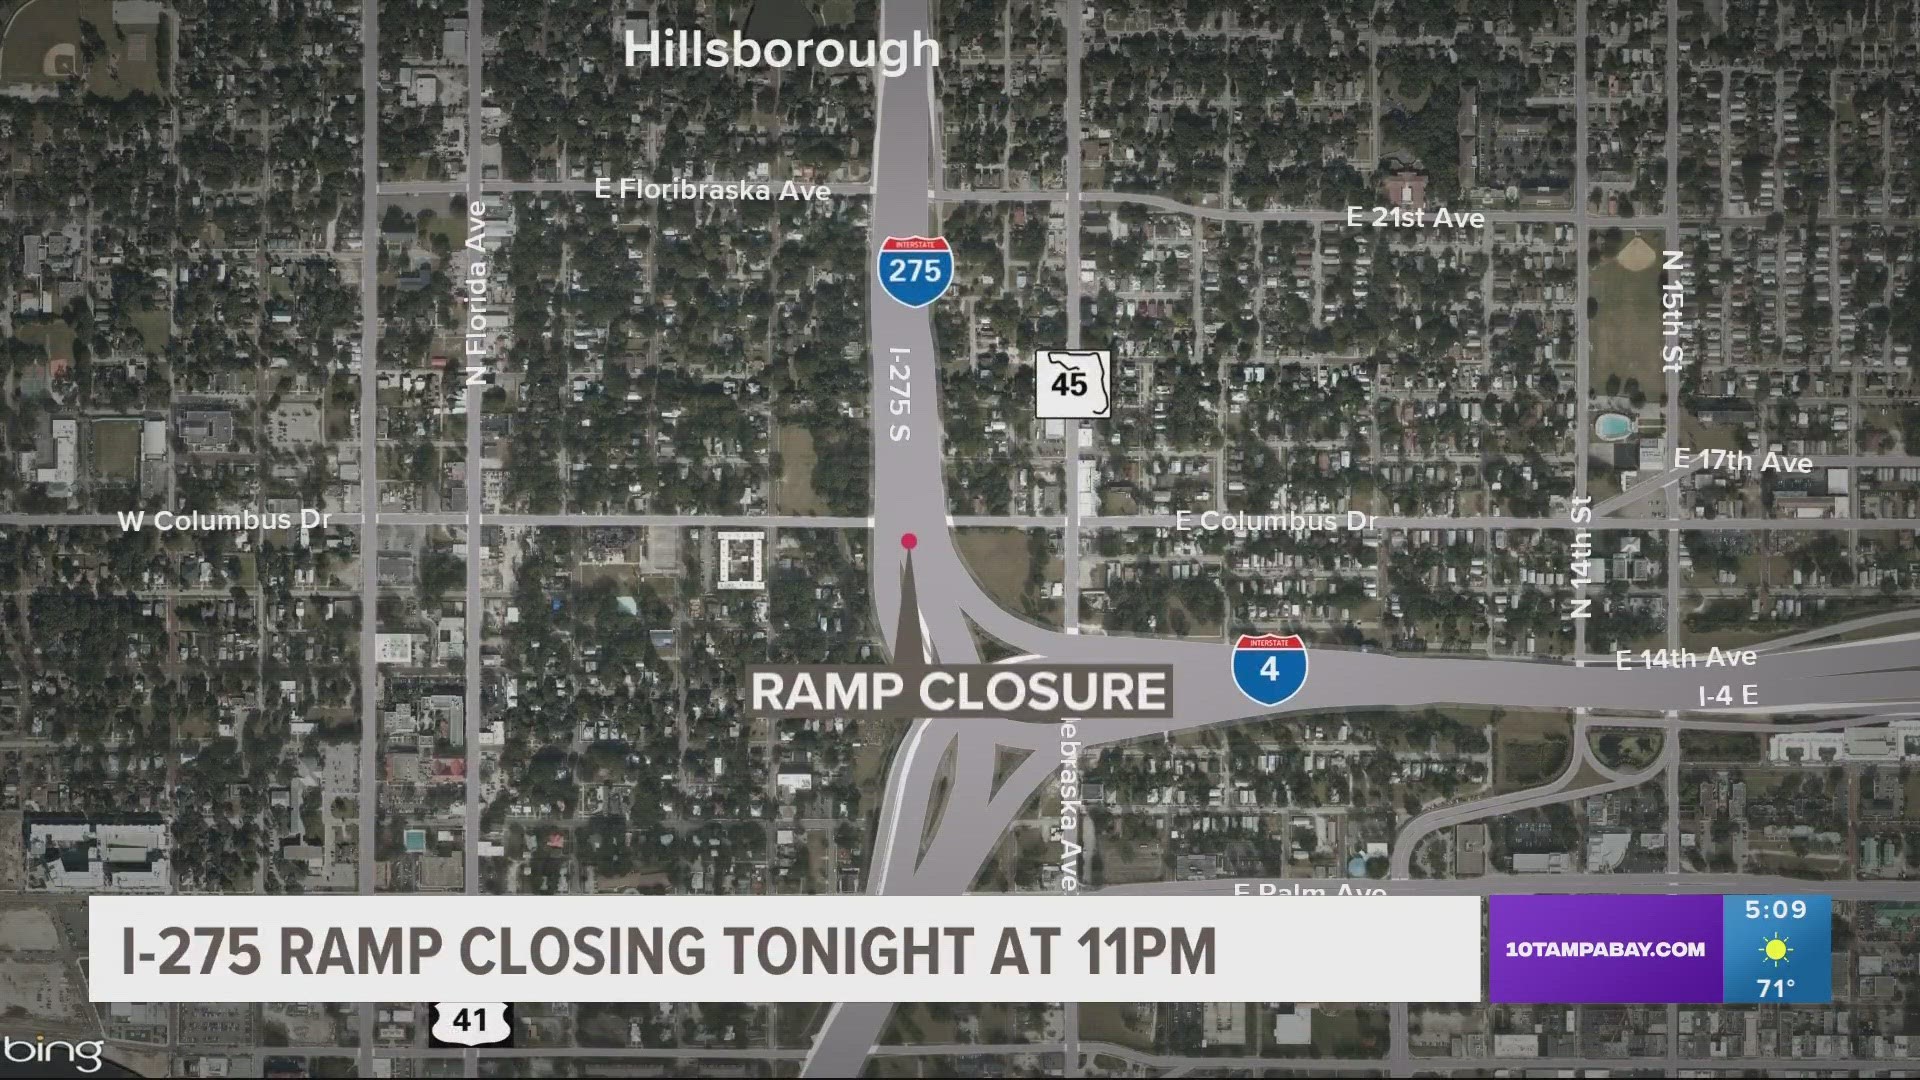 During the ramp closure, drivers will have to take a detour around the work zone by going south on I-275.